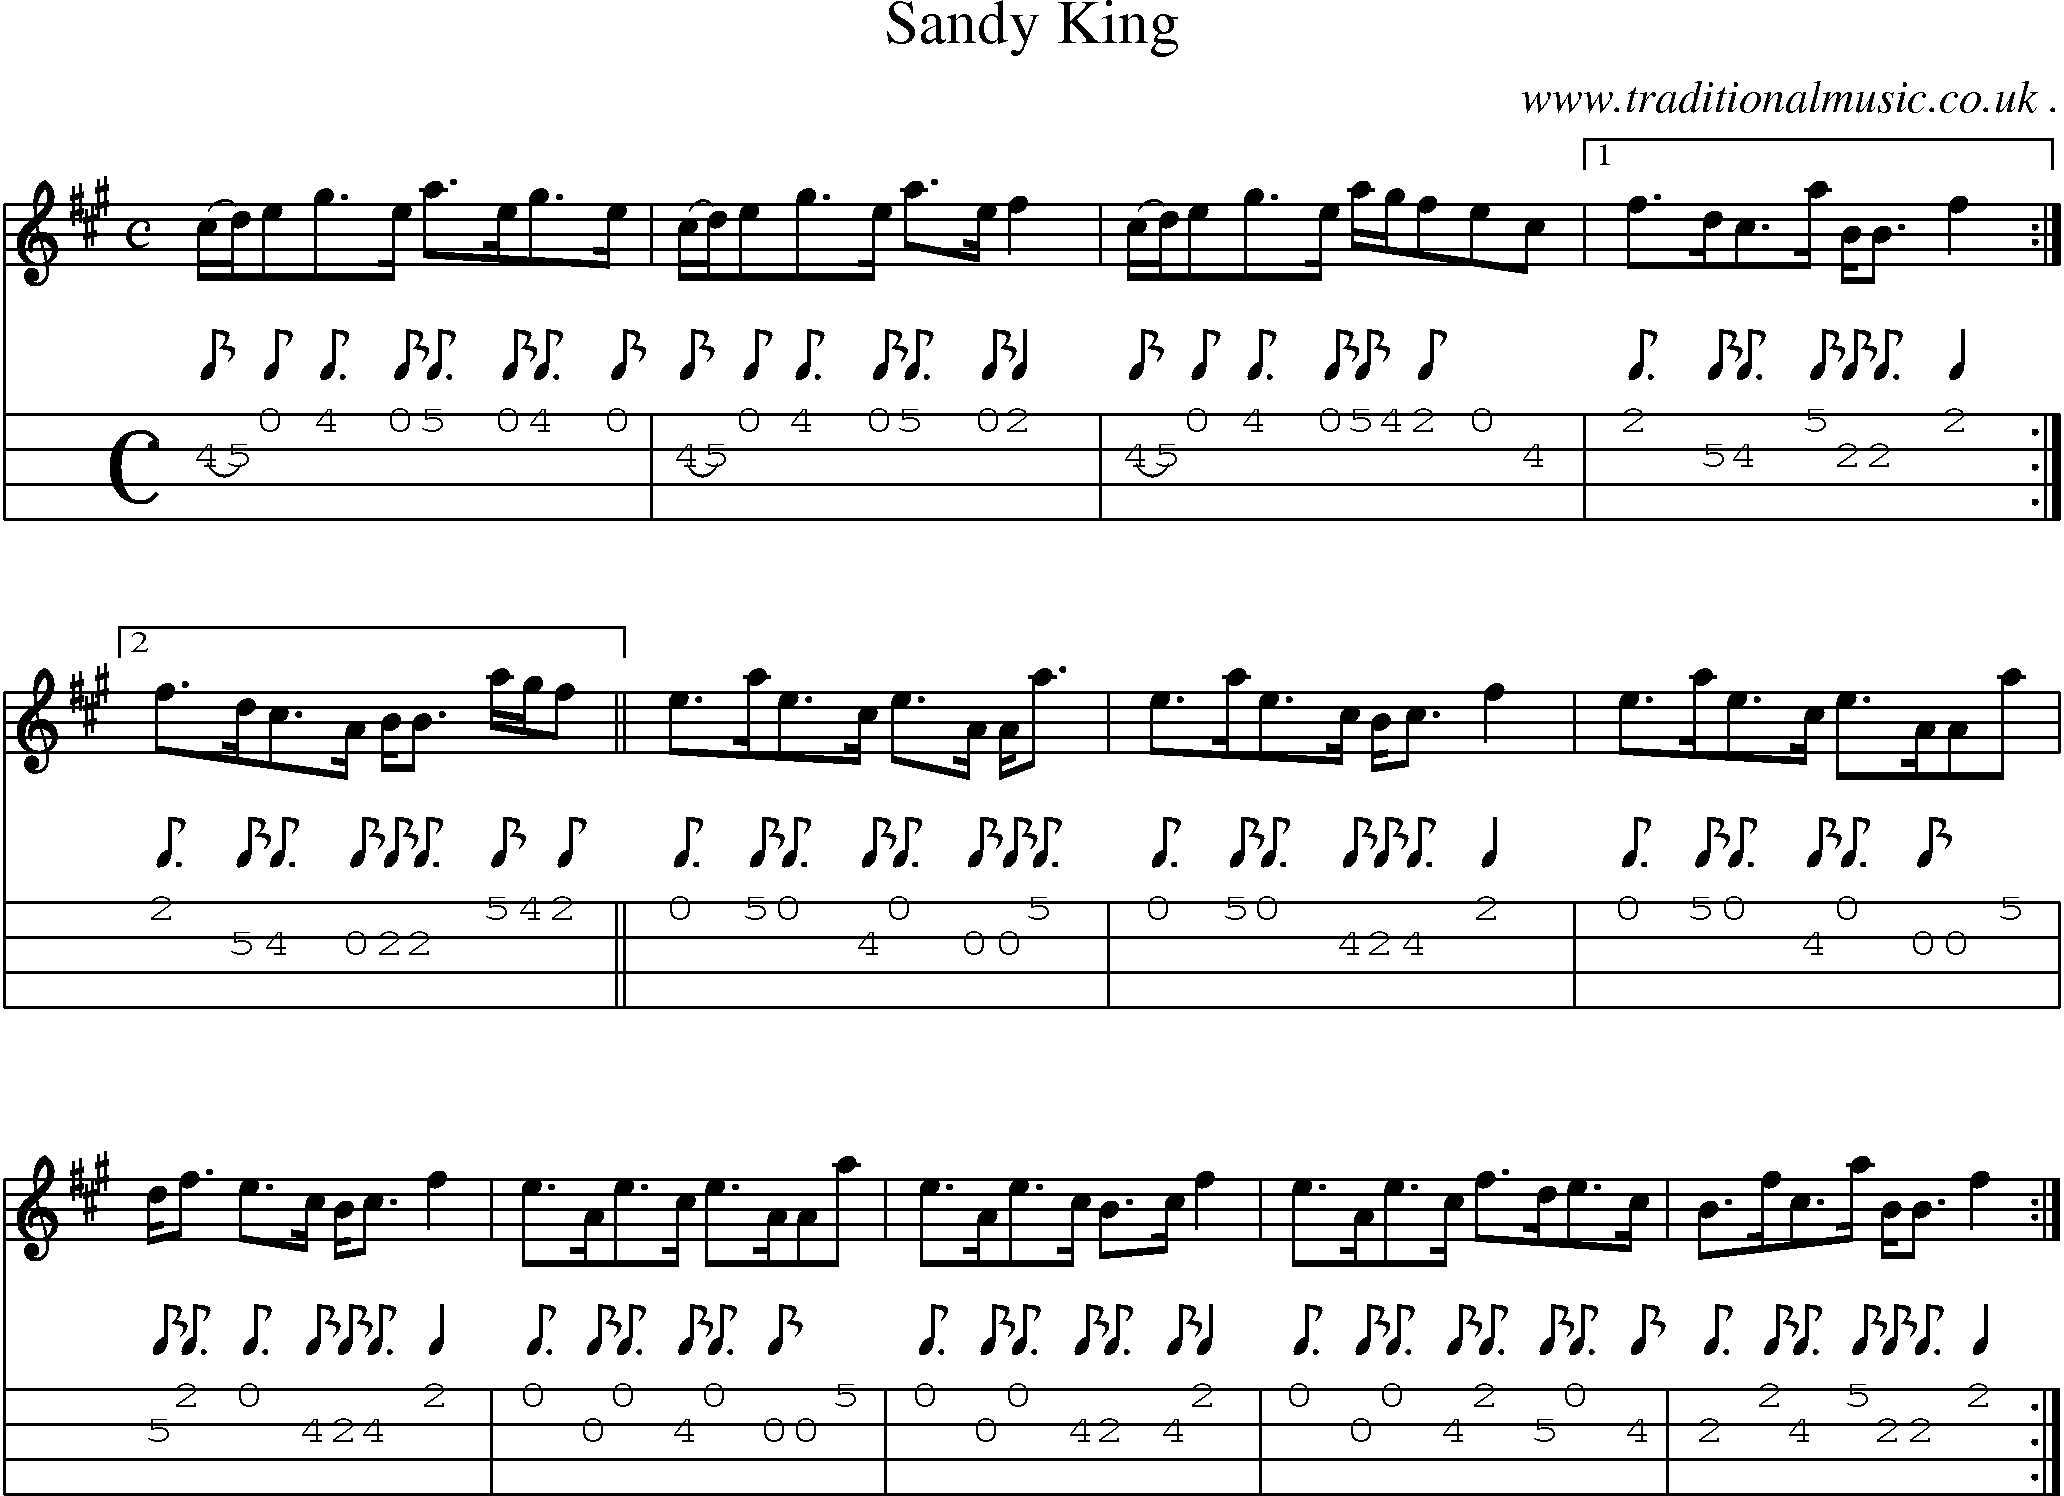 Sheet-music  score, Chords and Mandolin Tabs for Sandy King